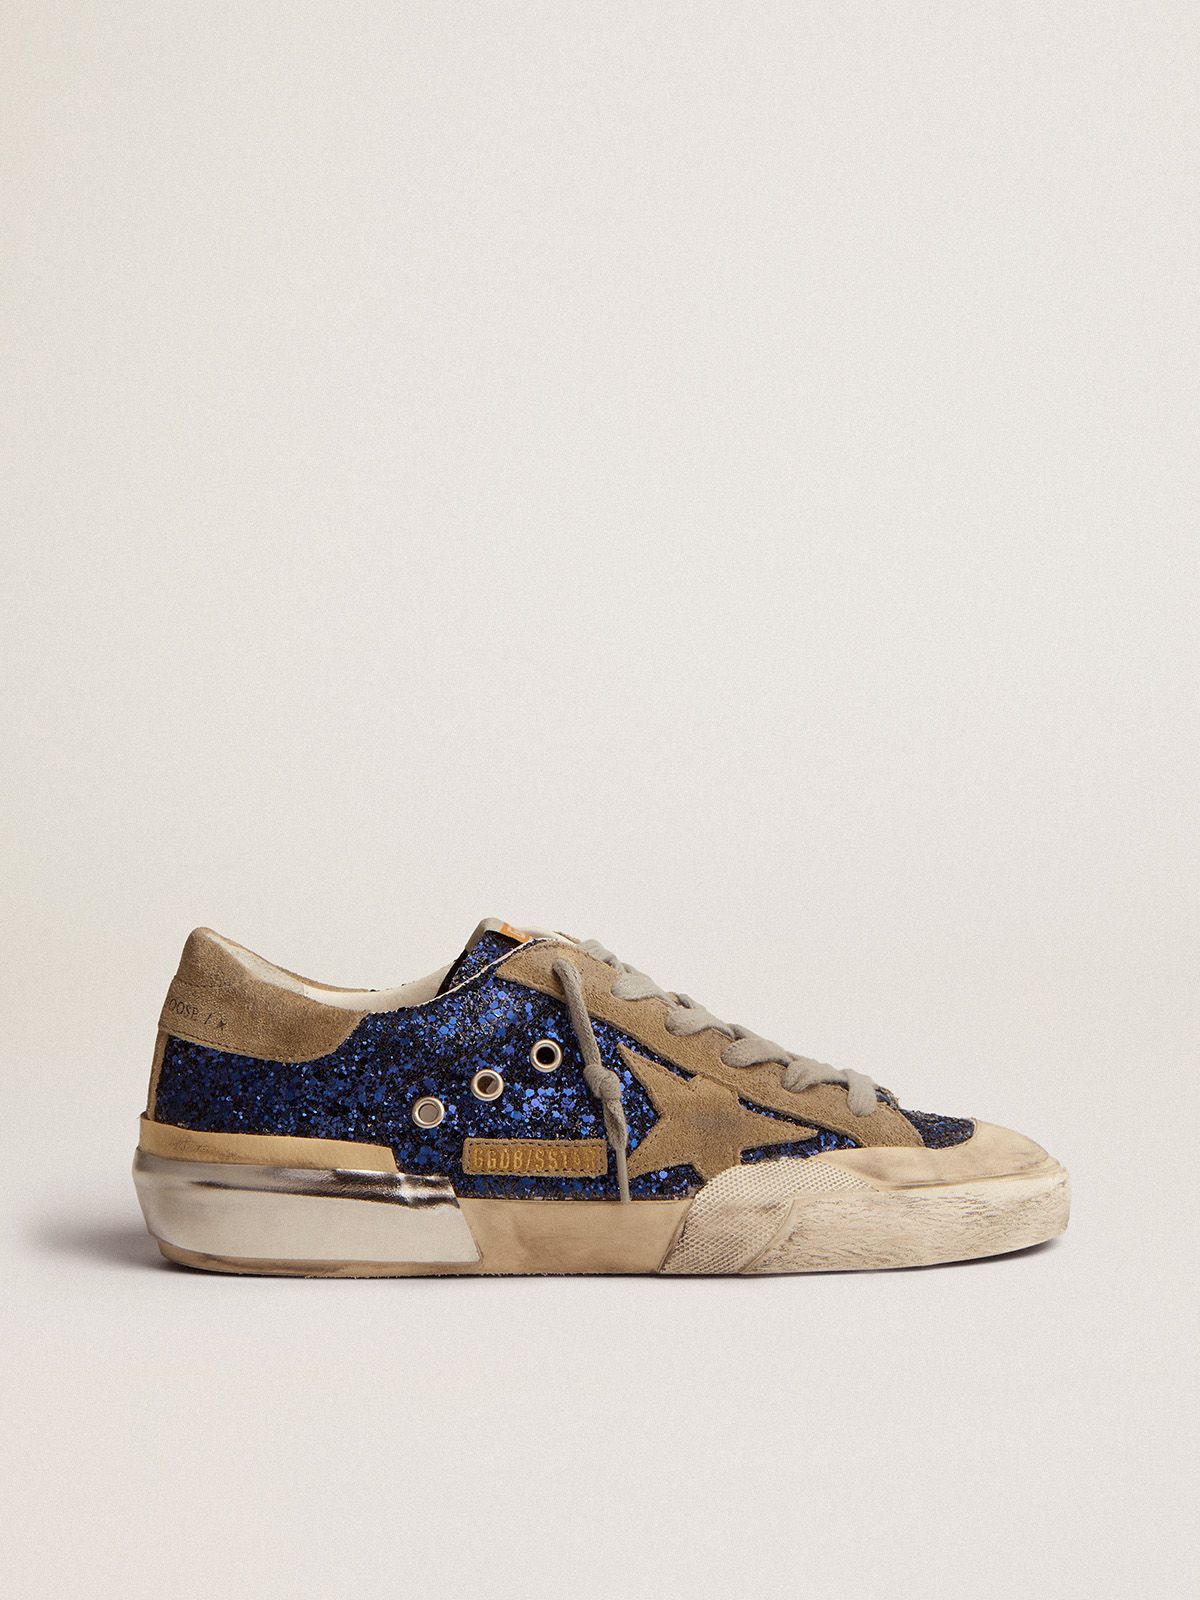 Sneakers Uomo Golden Goose Super-Star sneakers in blue glitter with dove-gray suede star and multi-foxing